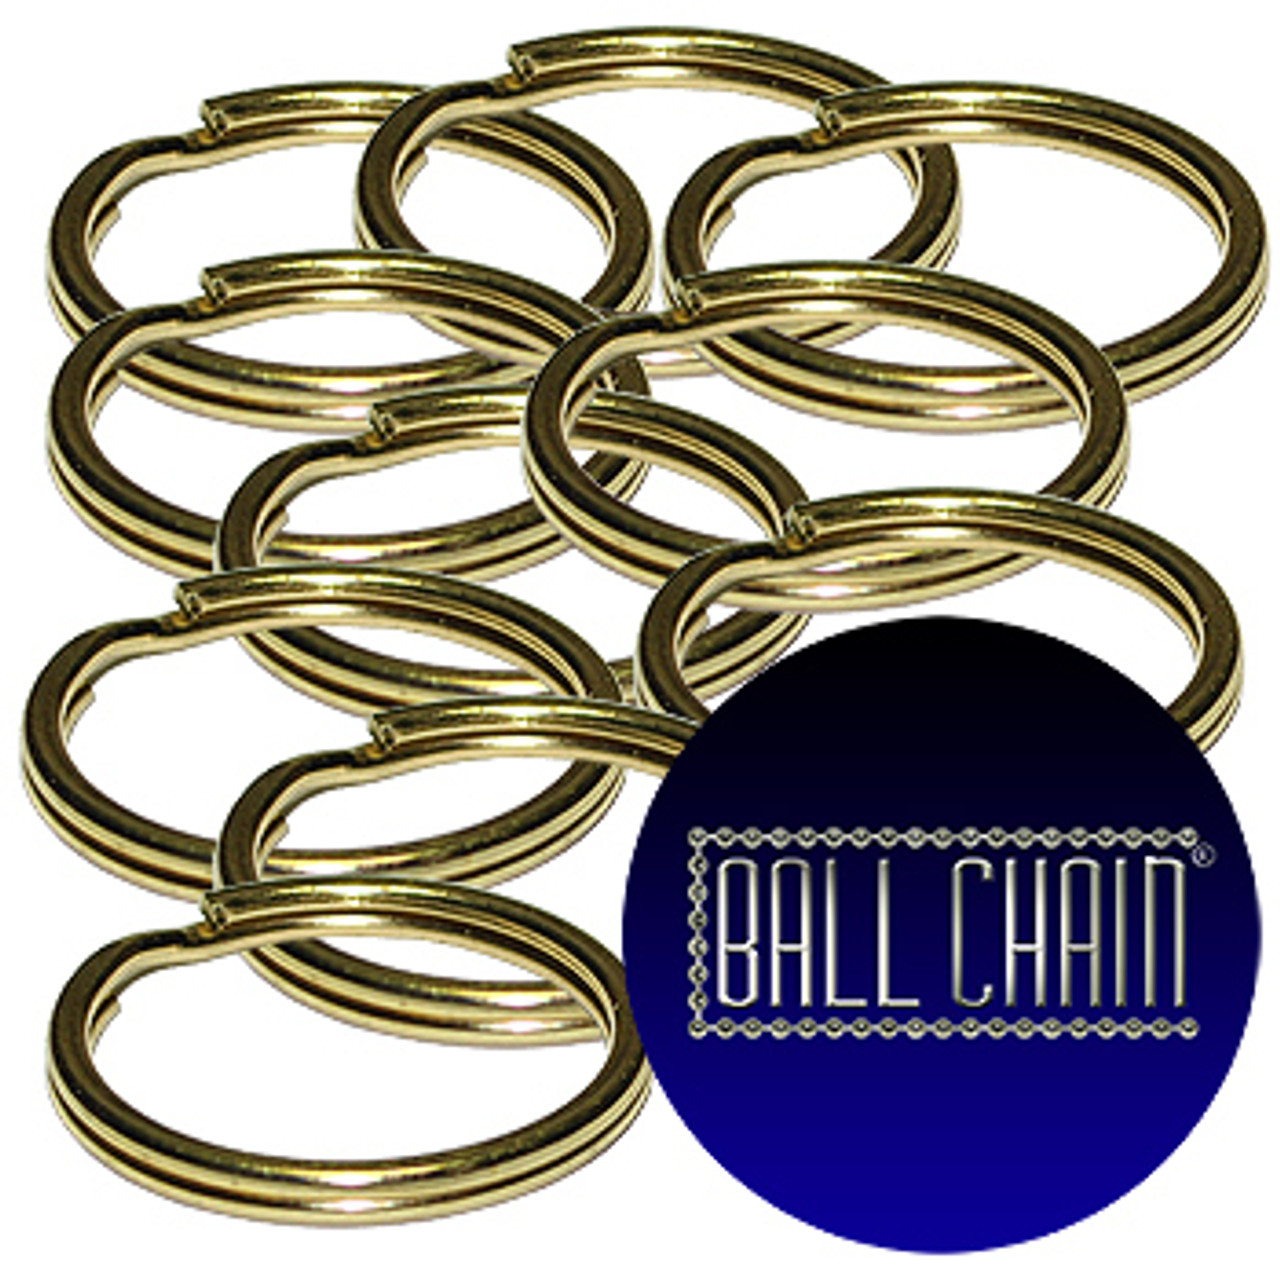 Bulk 24 mm Brass Plated Steel Split Key Rings sold at low factory direct prices by Ball Chain Manufacturing Corp. Inc. 